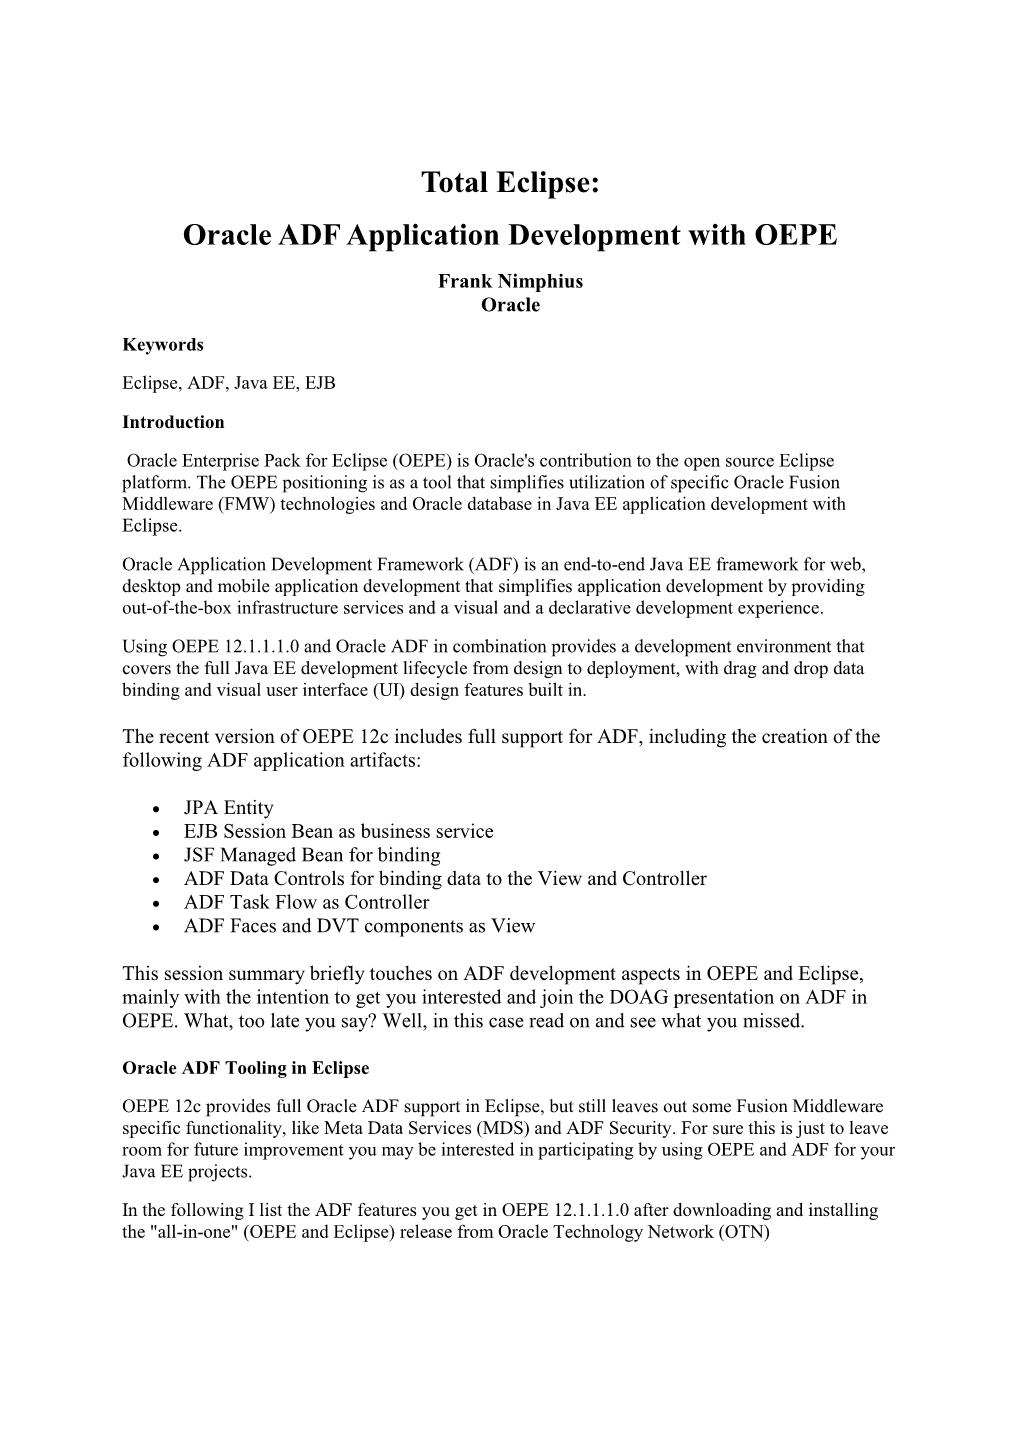 Total Eclipse: Oracle ADF Application Development with OEPE Frank Nimphius Oracle